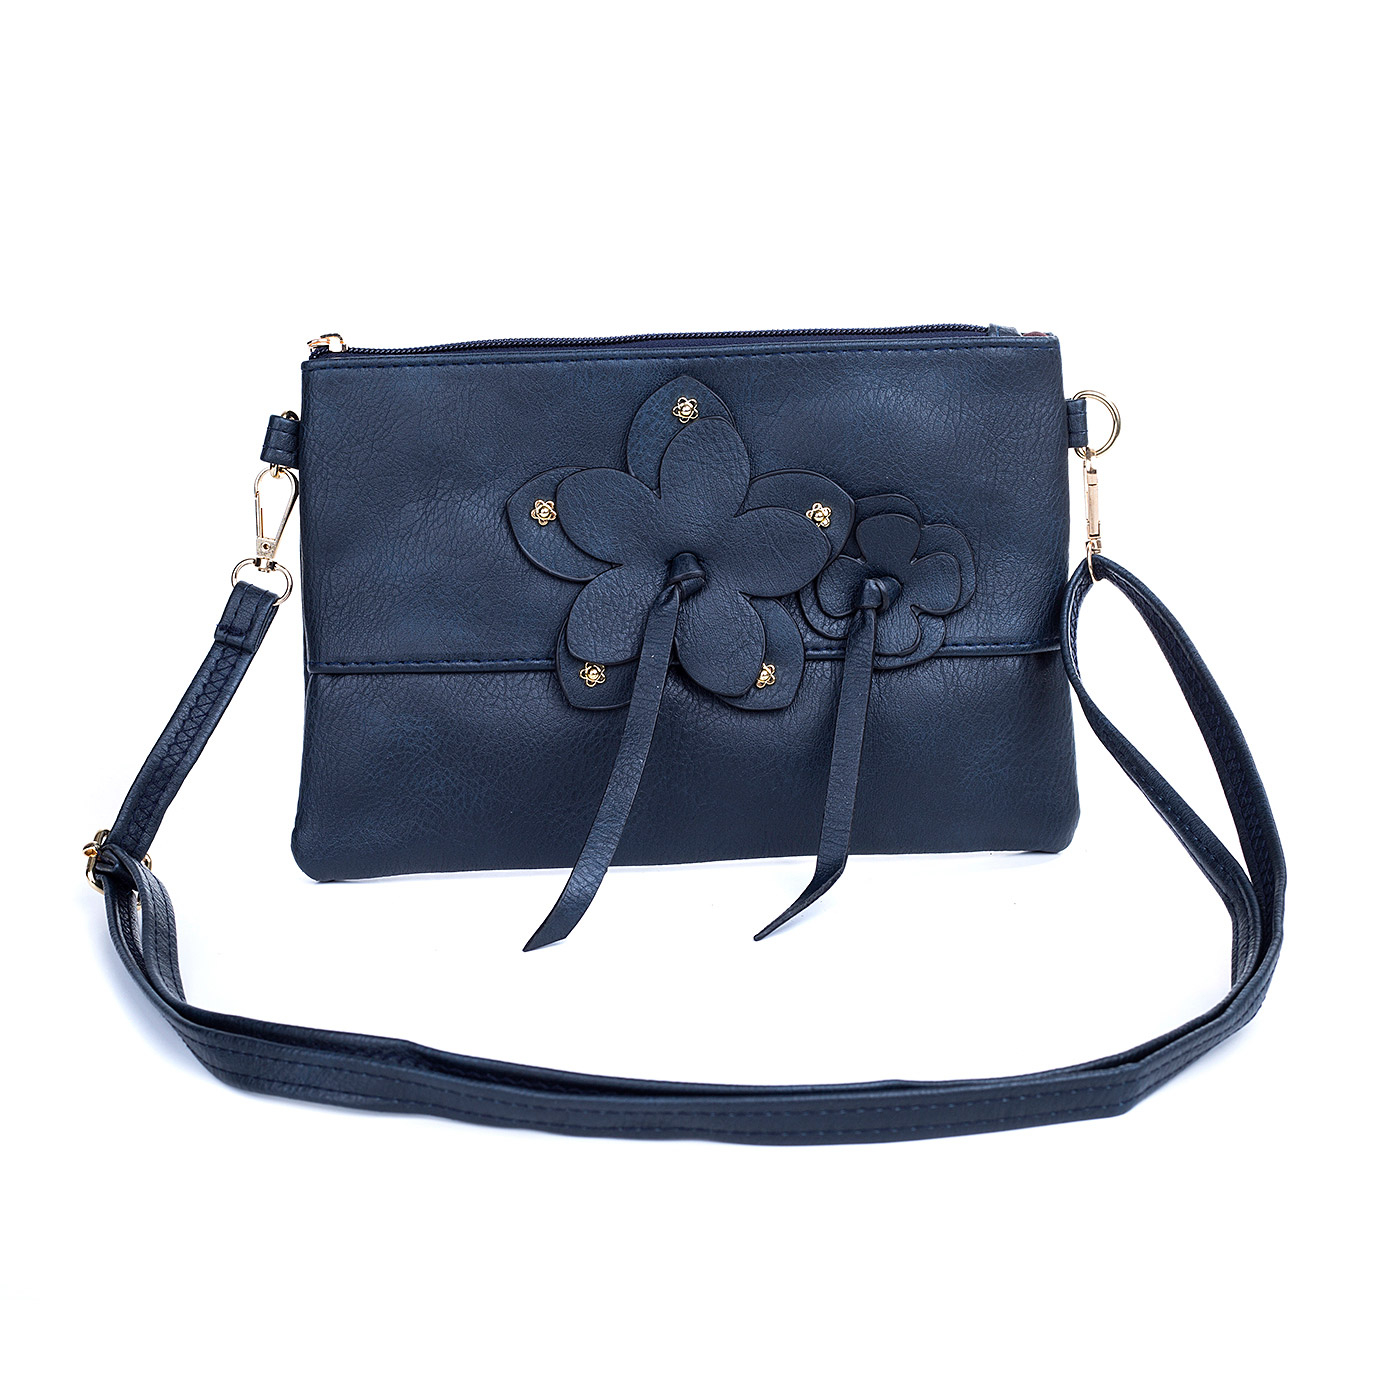 *NEW* Crossbody Bag - Flower Zip: Enjoy effortless style with the Flower Zip Crossbody Bag! Whether you prefer a dark hue or something more subtle, we have the perfect shade for you. This purse is su - Ciao Bella Dresses